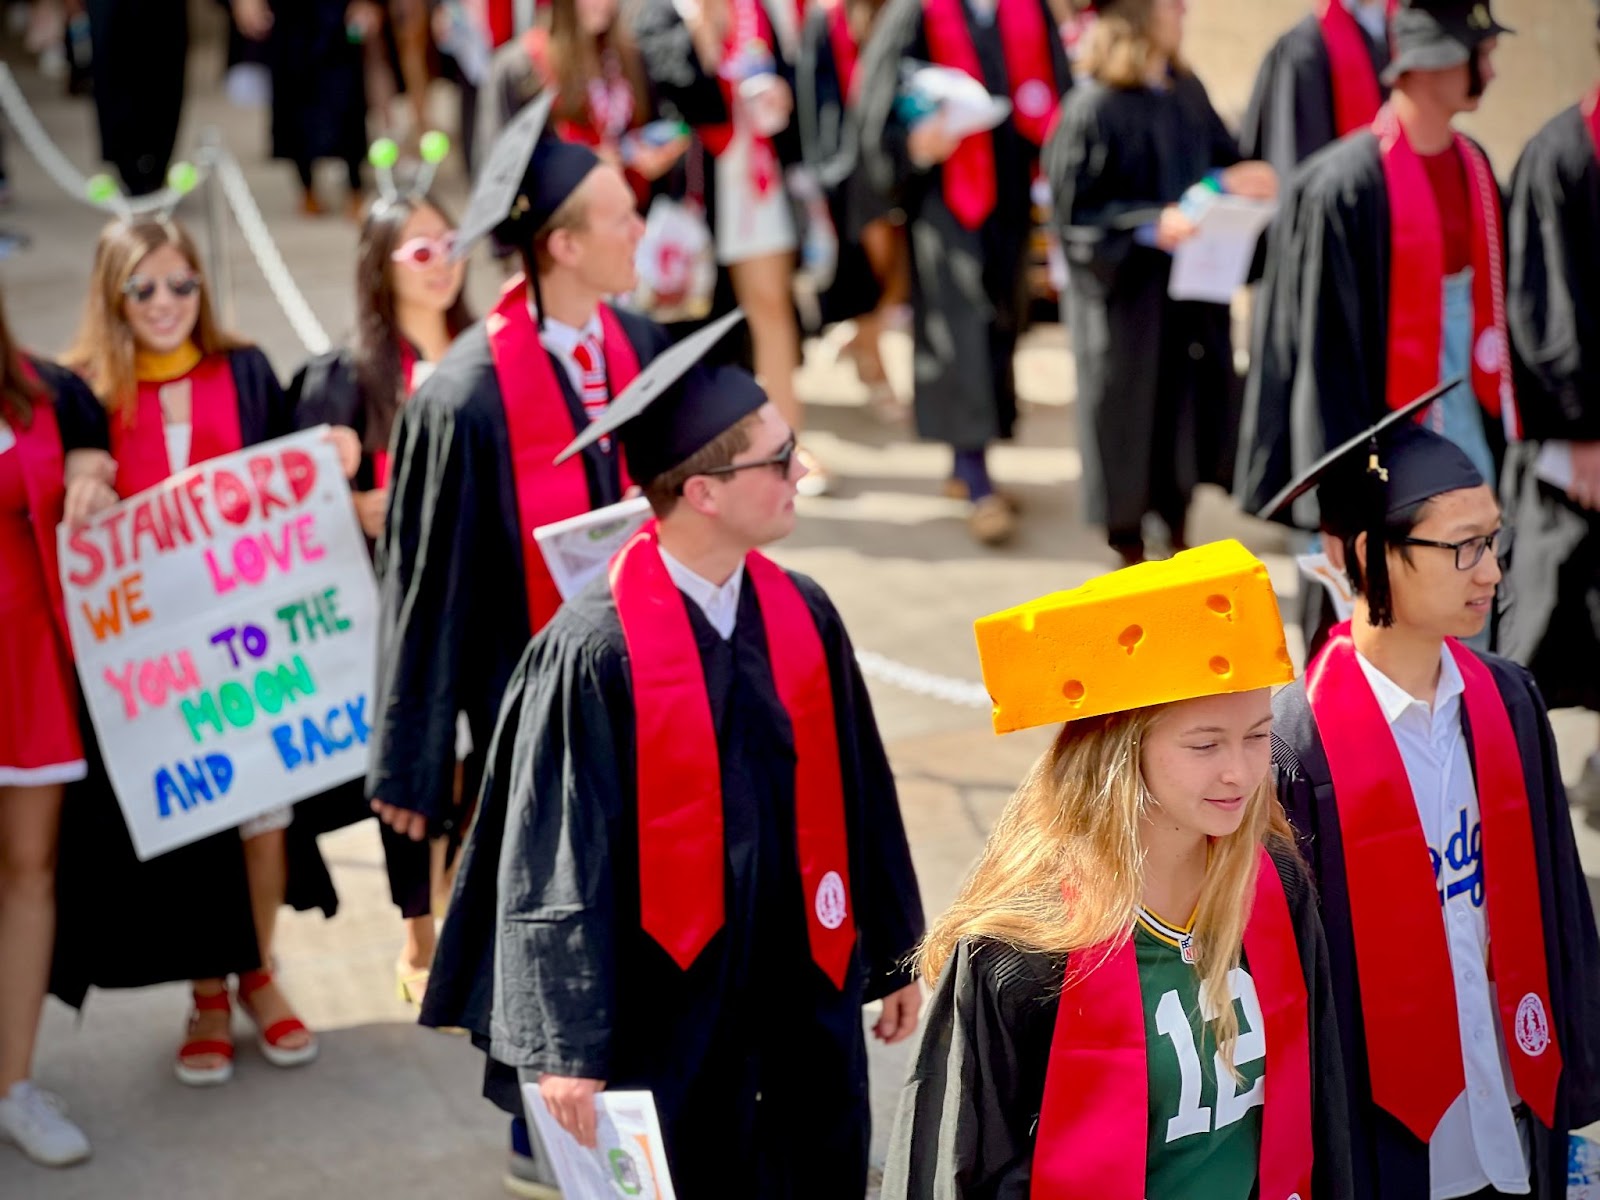 Stanford hosts 131st Commencement with virtual address from Netflix CEO Reed Hastings